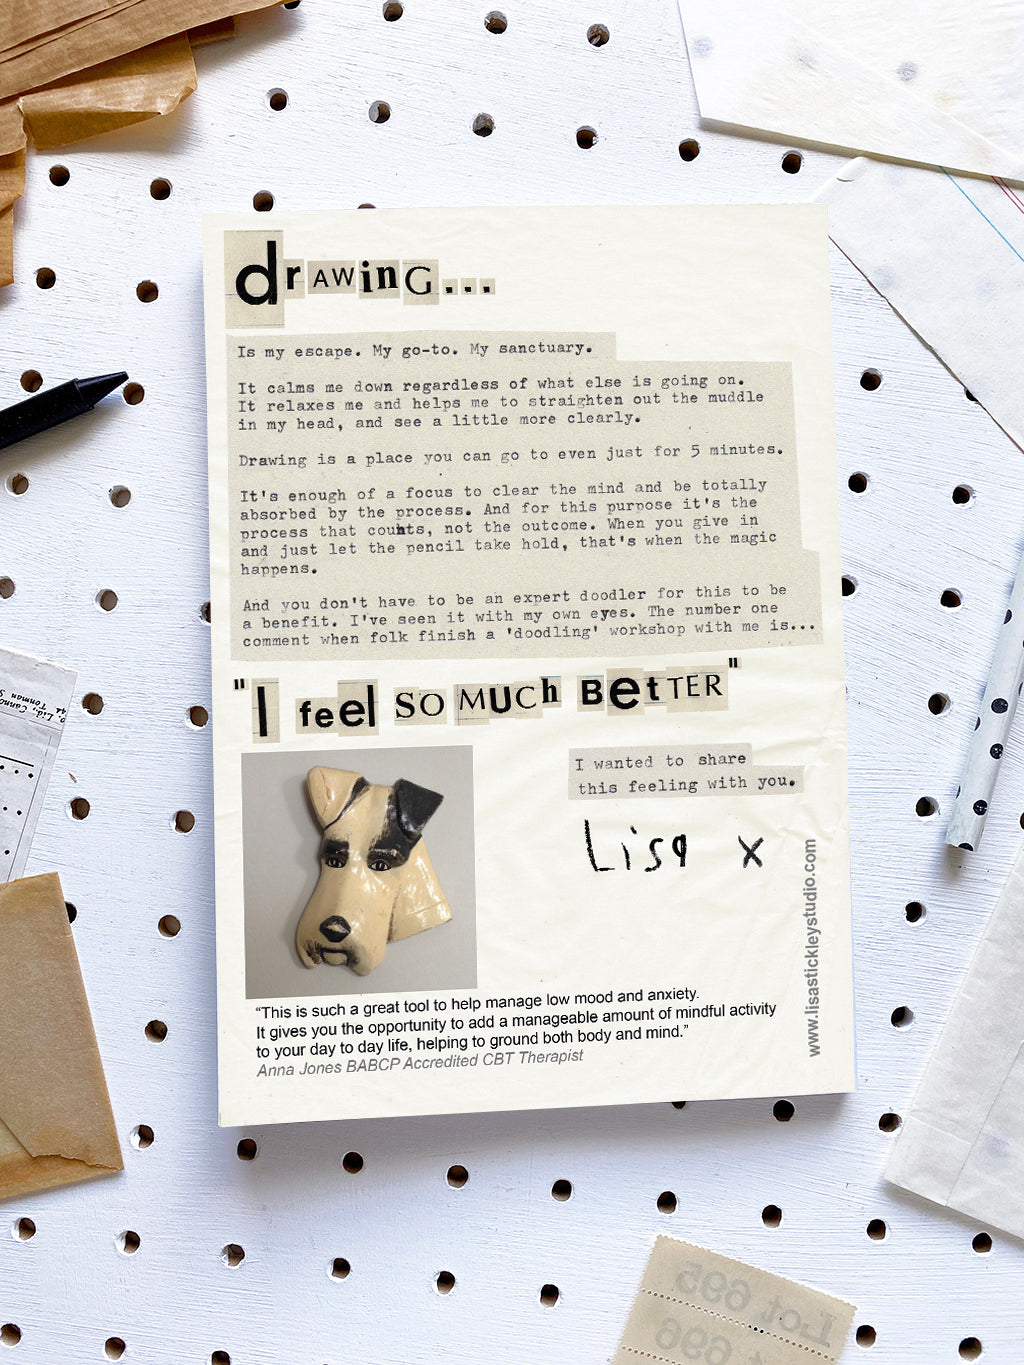 A-Back-Of-An-Envelope Doodling Book- DOGS